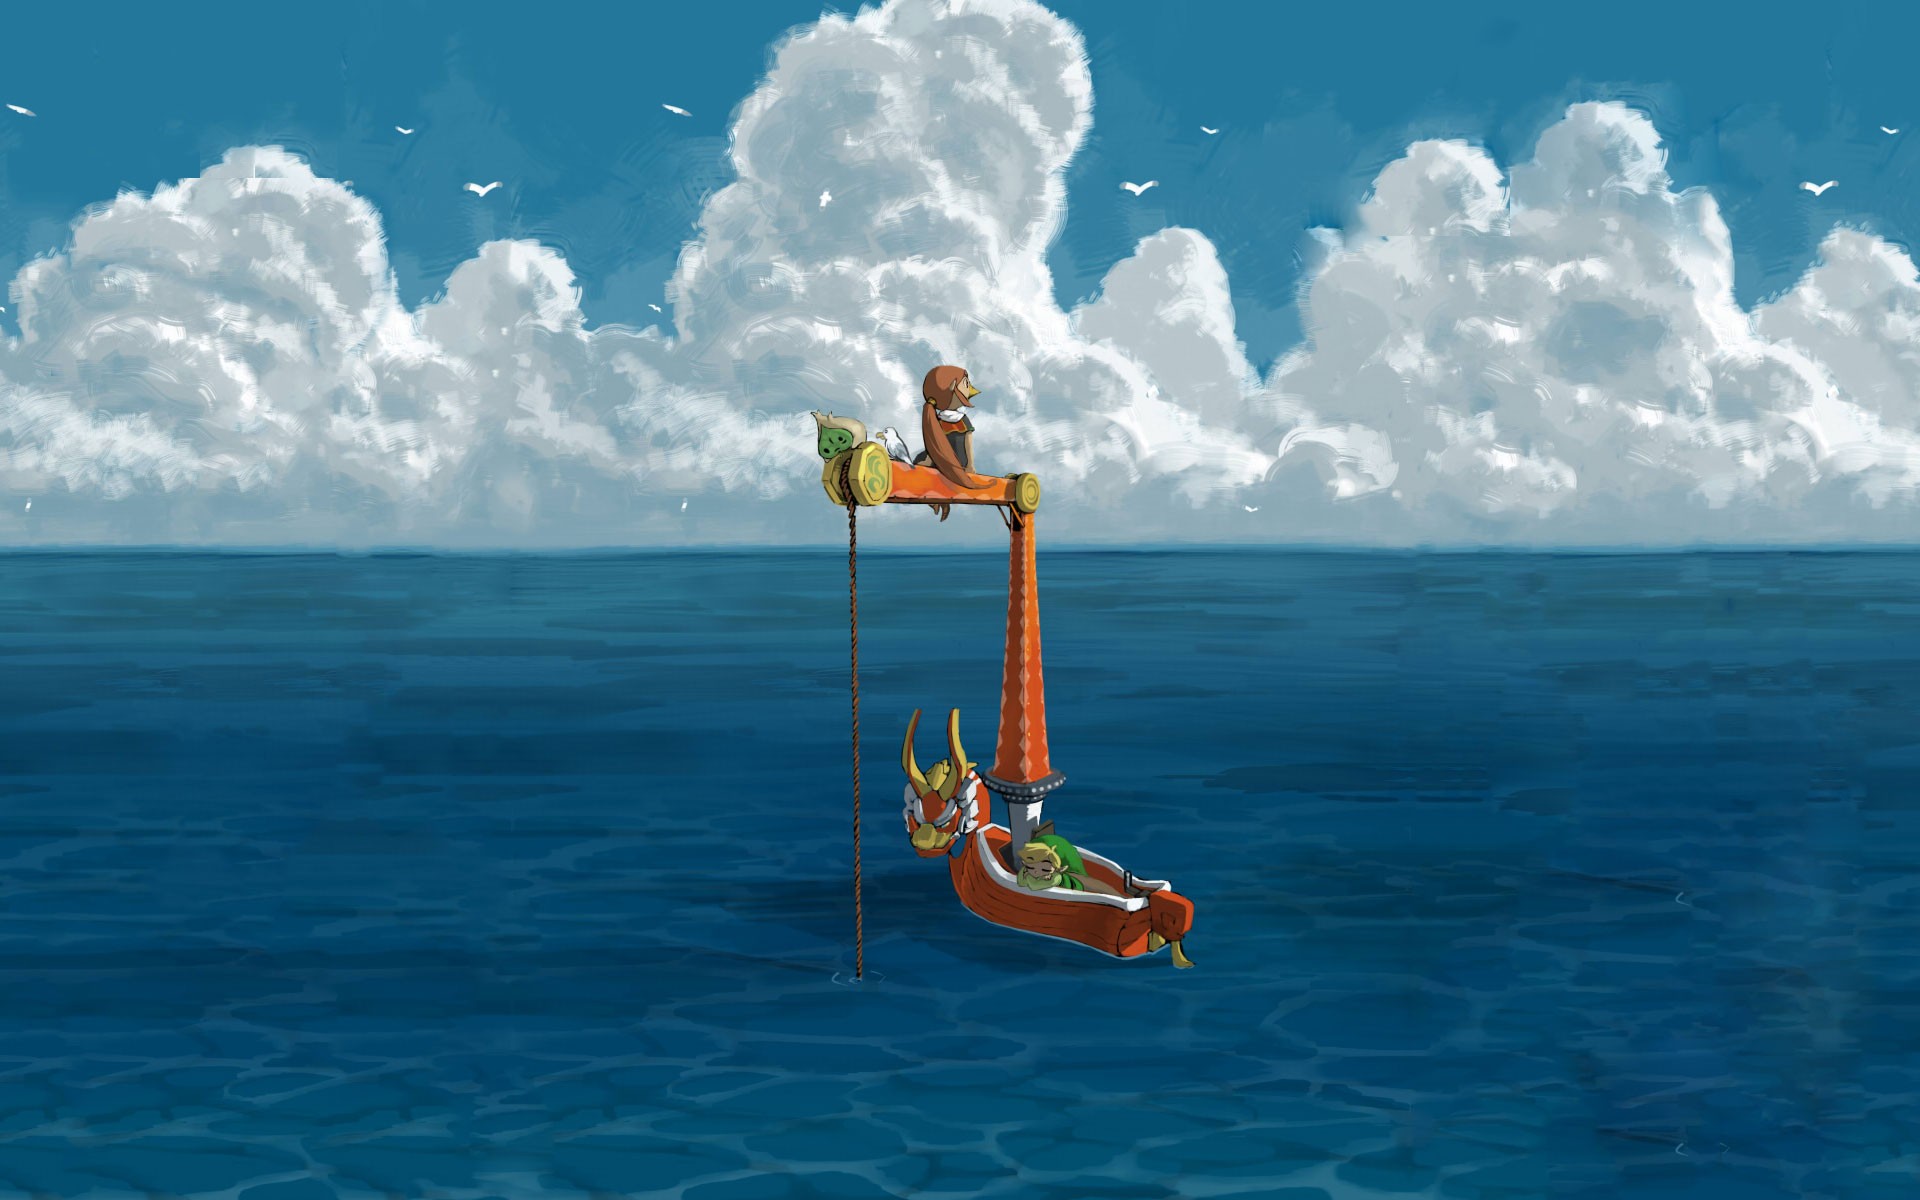 General 1920x1200 video games The Legend of Zelda: The Wind Waker Link video game art boat clouds